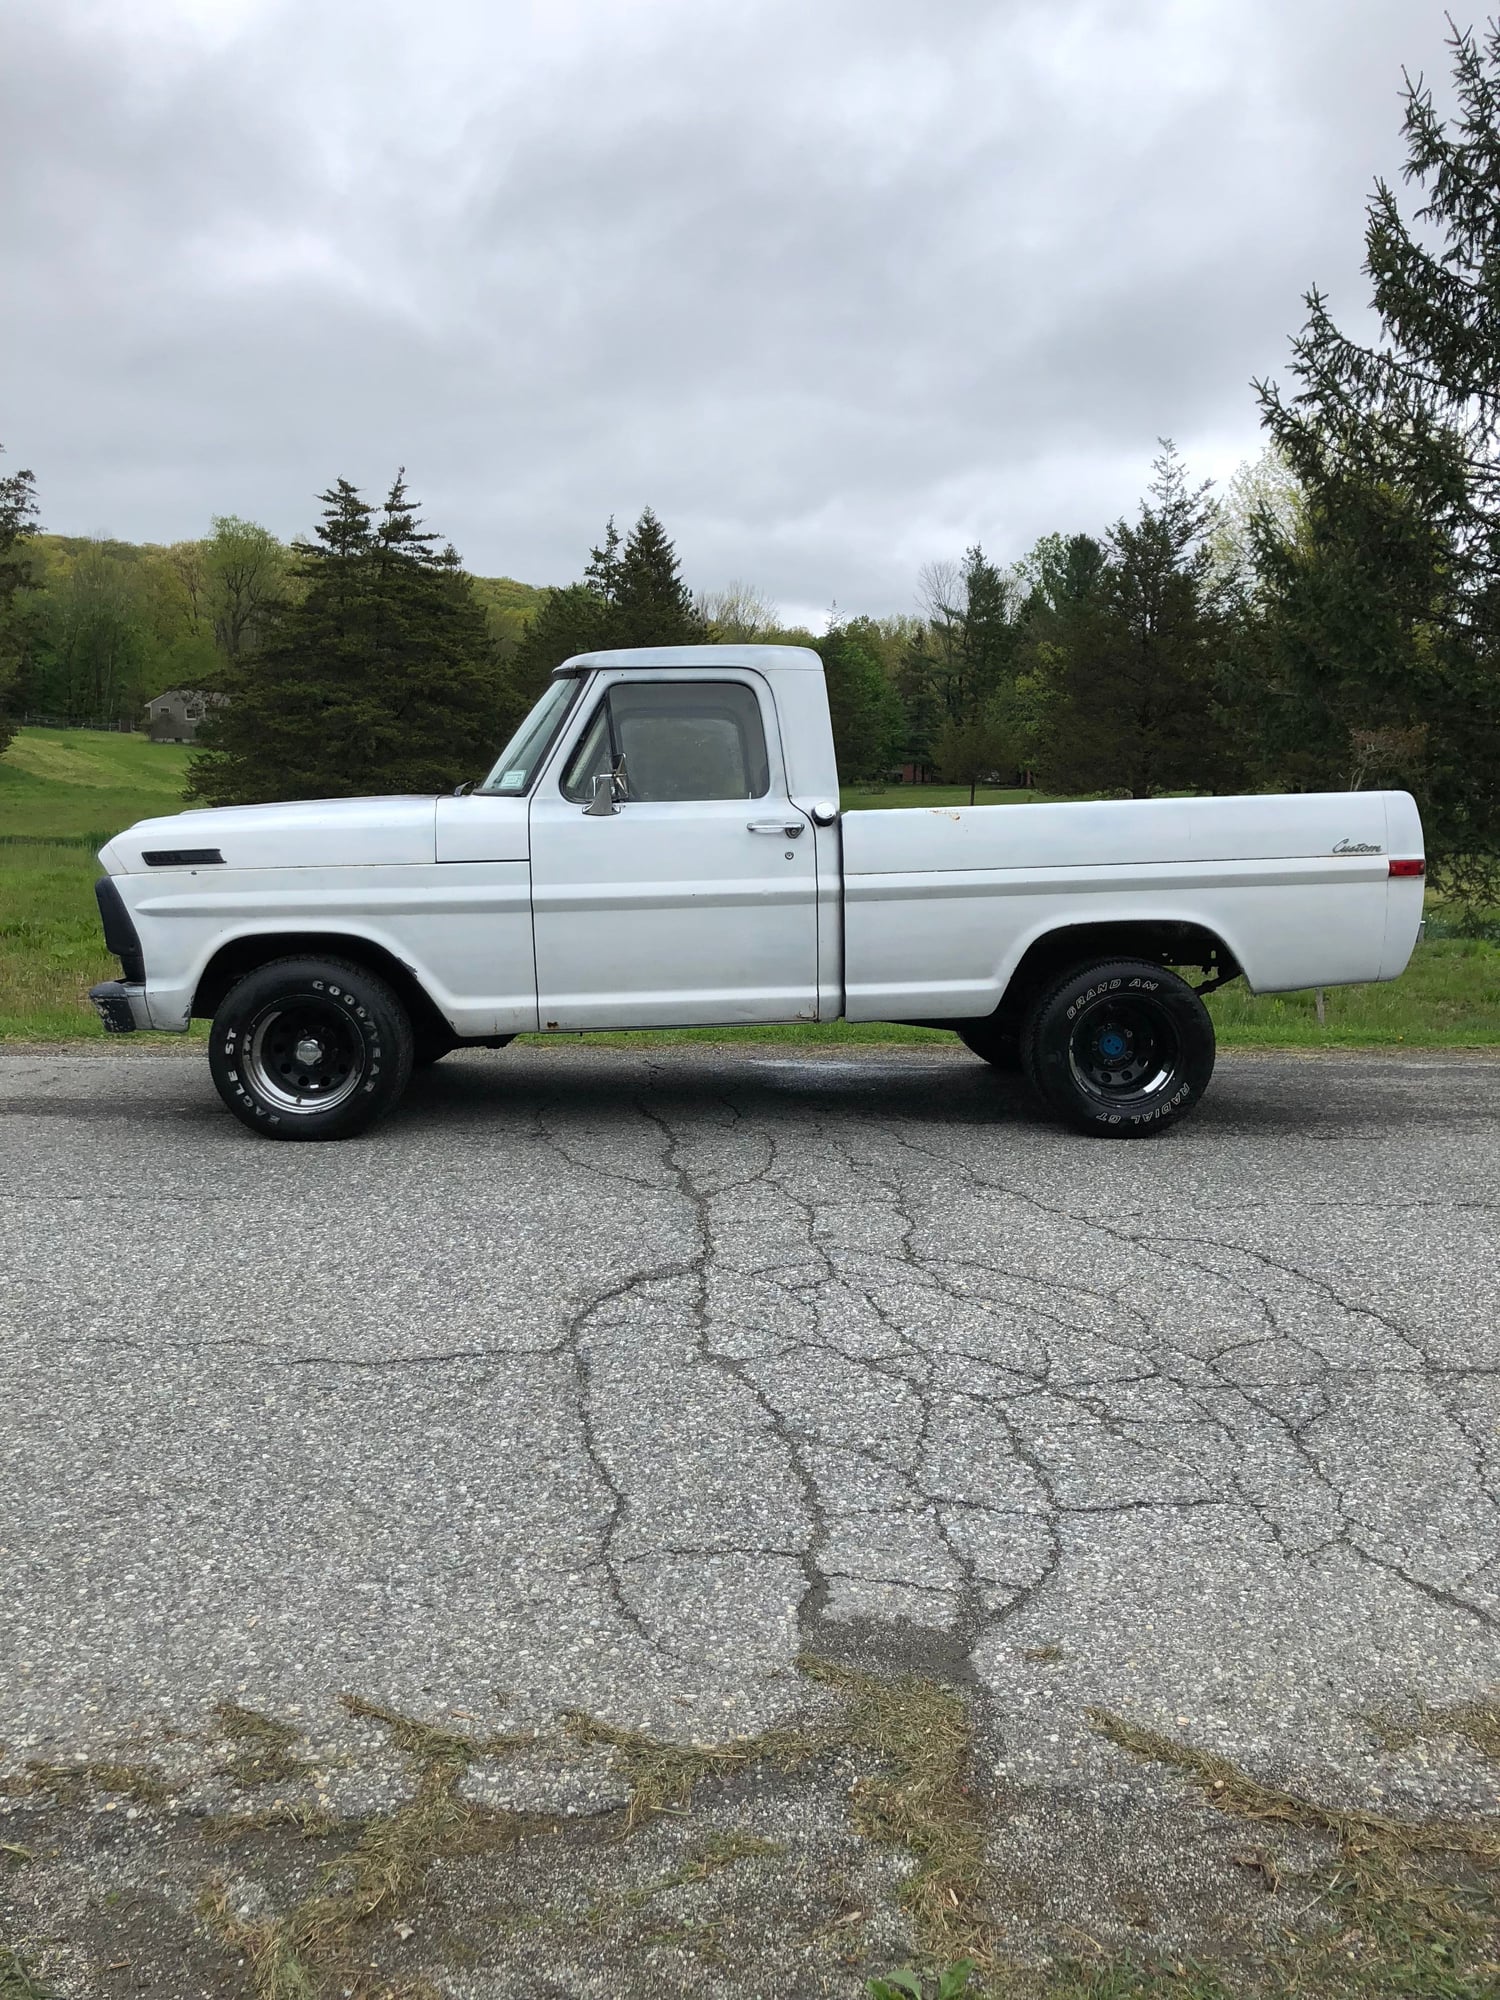 1969 Ford F-100 - 1969 Ford F100 Short Bed - Used - VIN F10YRF97438 - 100,000 Miles - 8 cyl - 2WD - Automatic - Truck - White - Pawling, NY 12564, United States